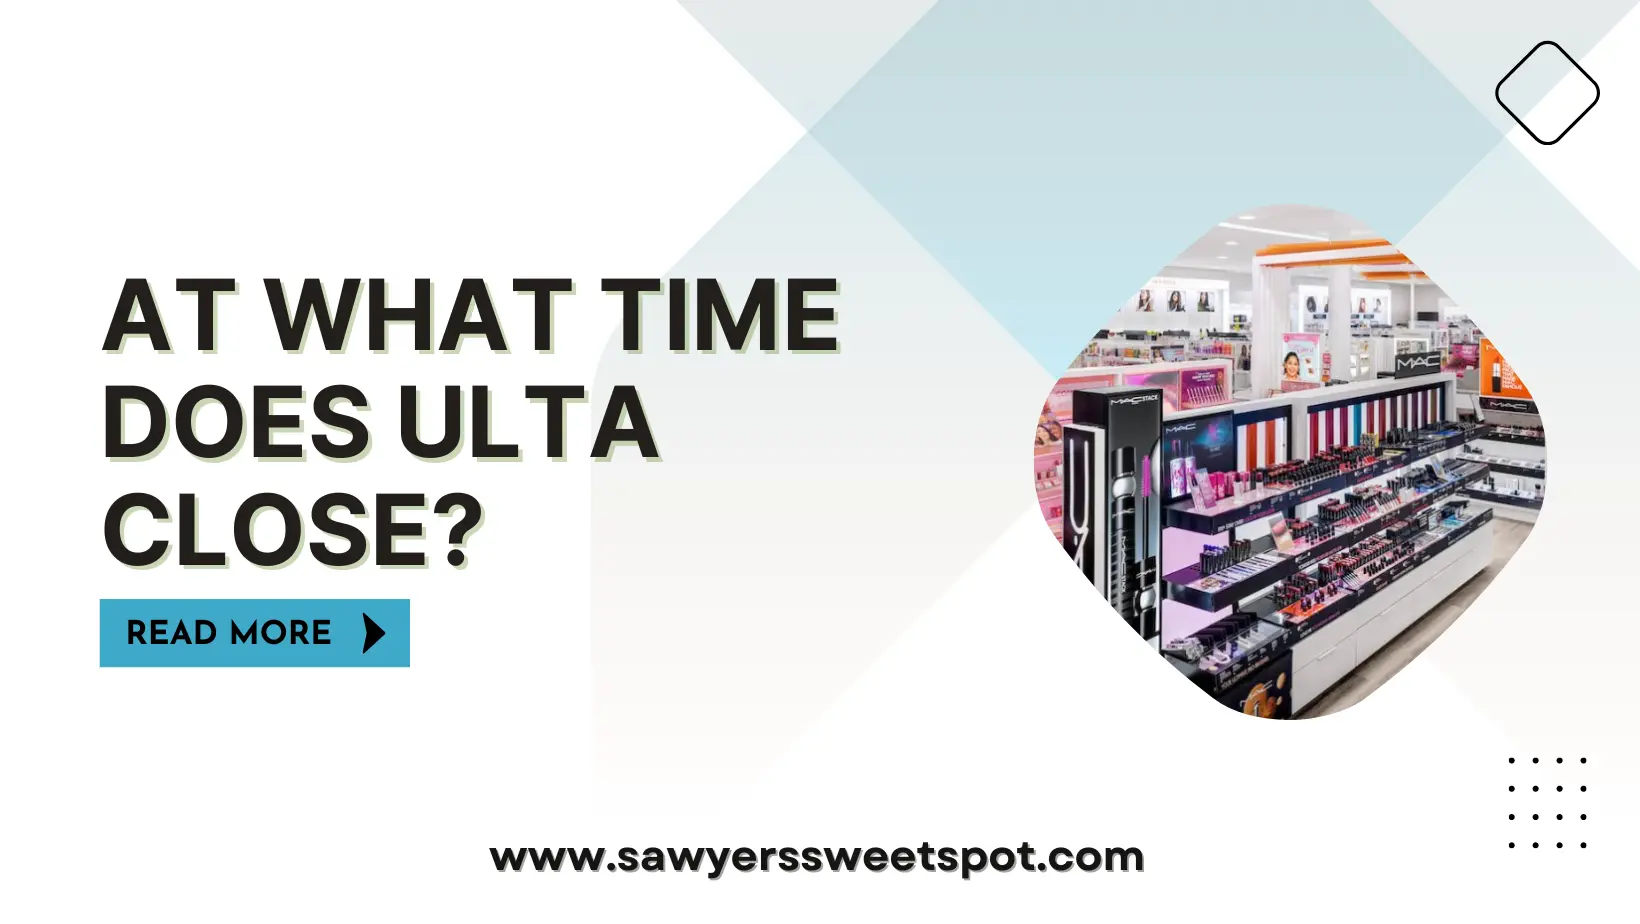 At What Time Does Ulta Close?